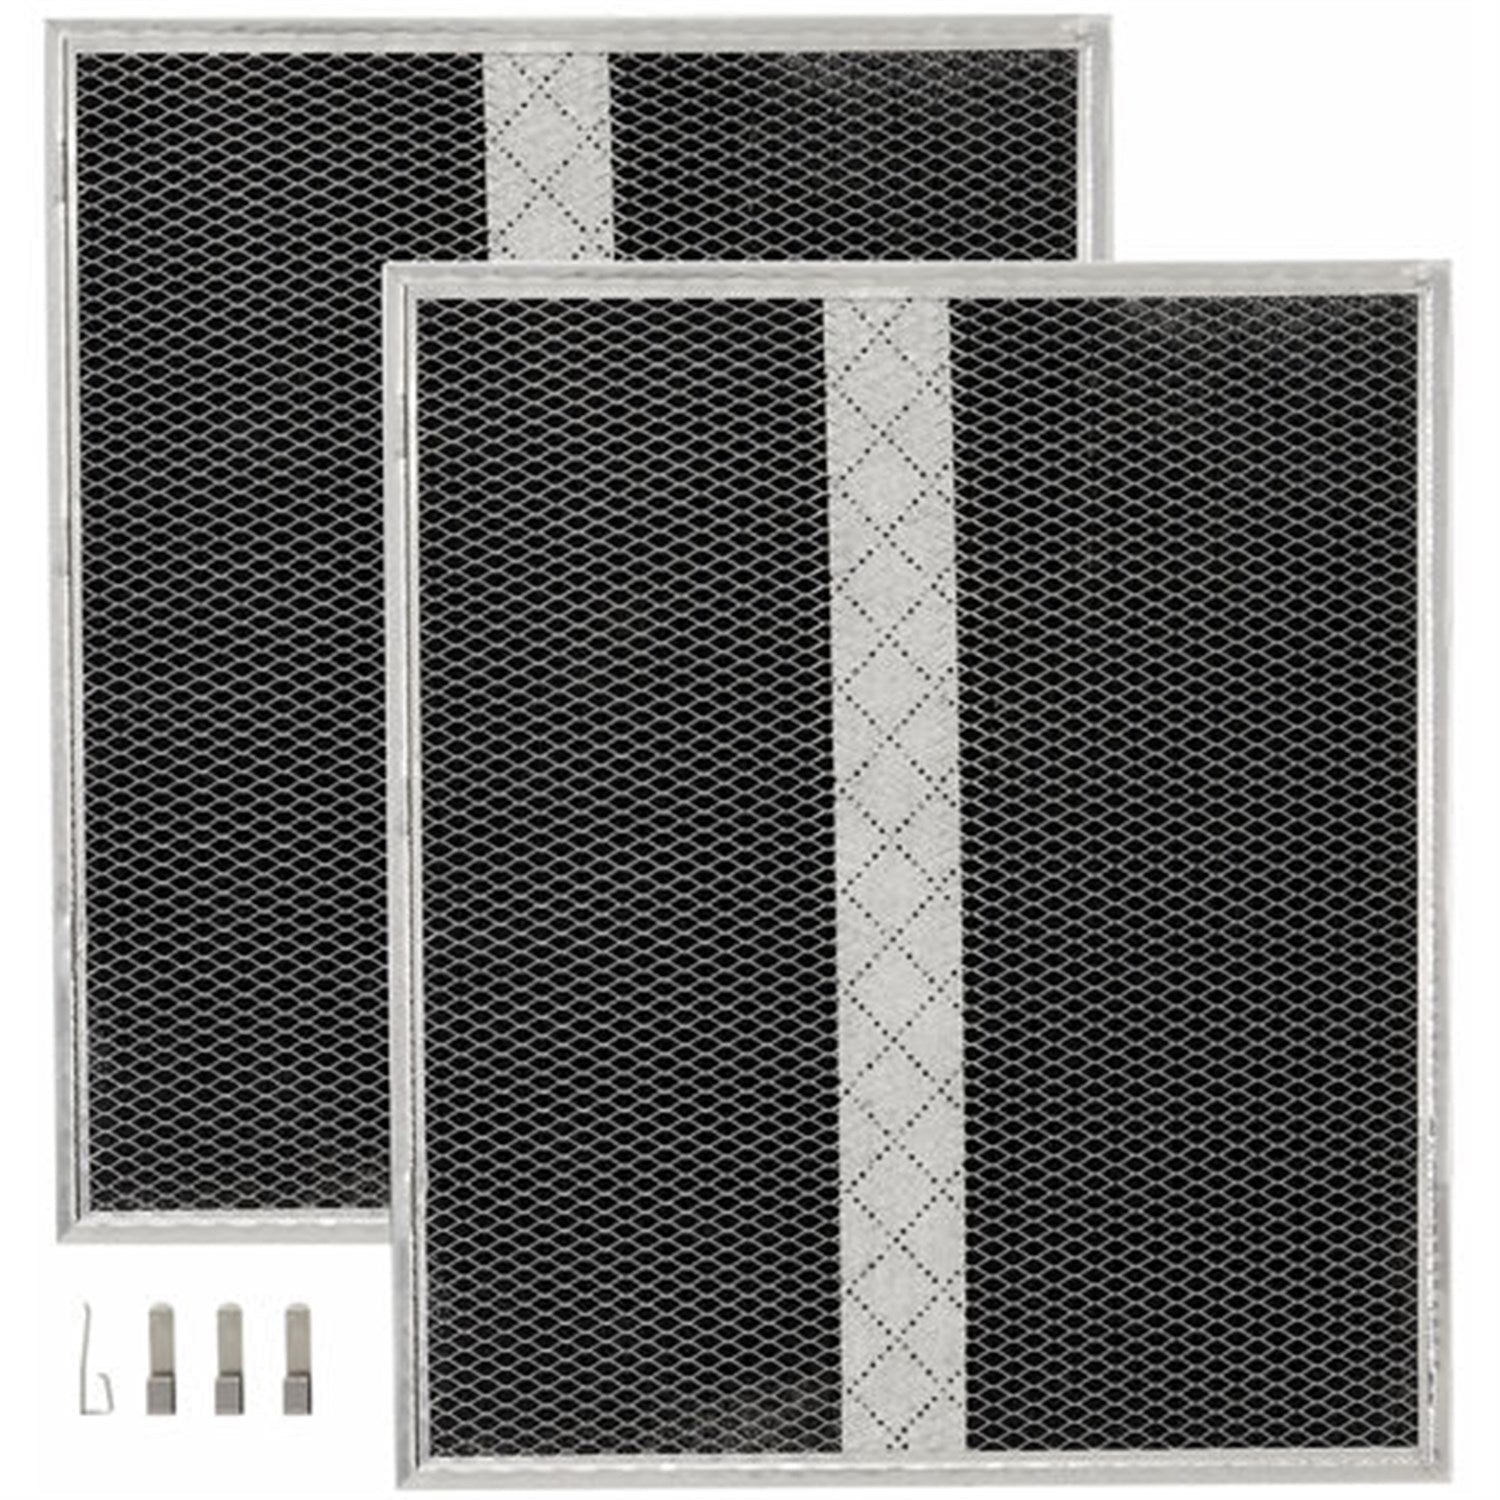 Broan HPF36 Charcoal Filter Kit (2-pack) for Filter Type Xd